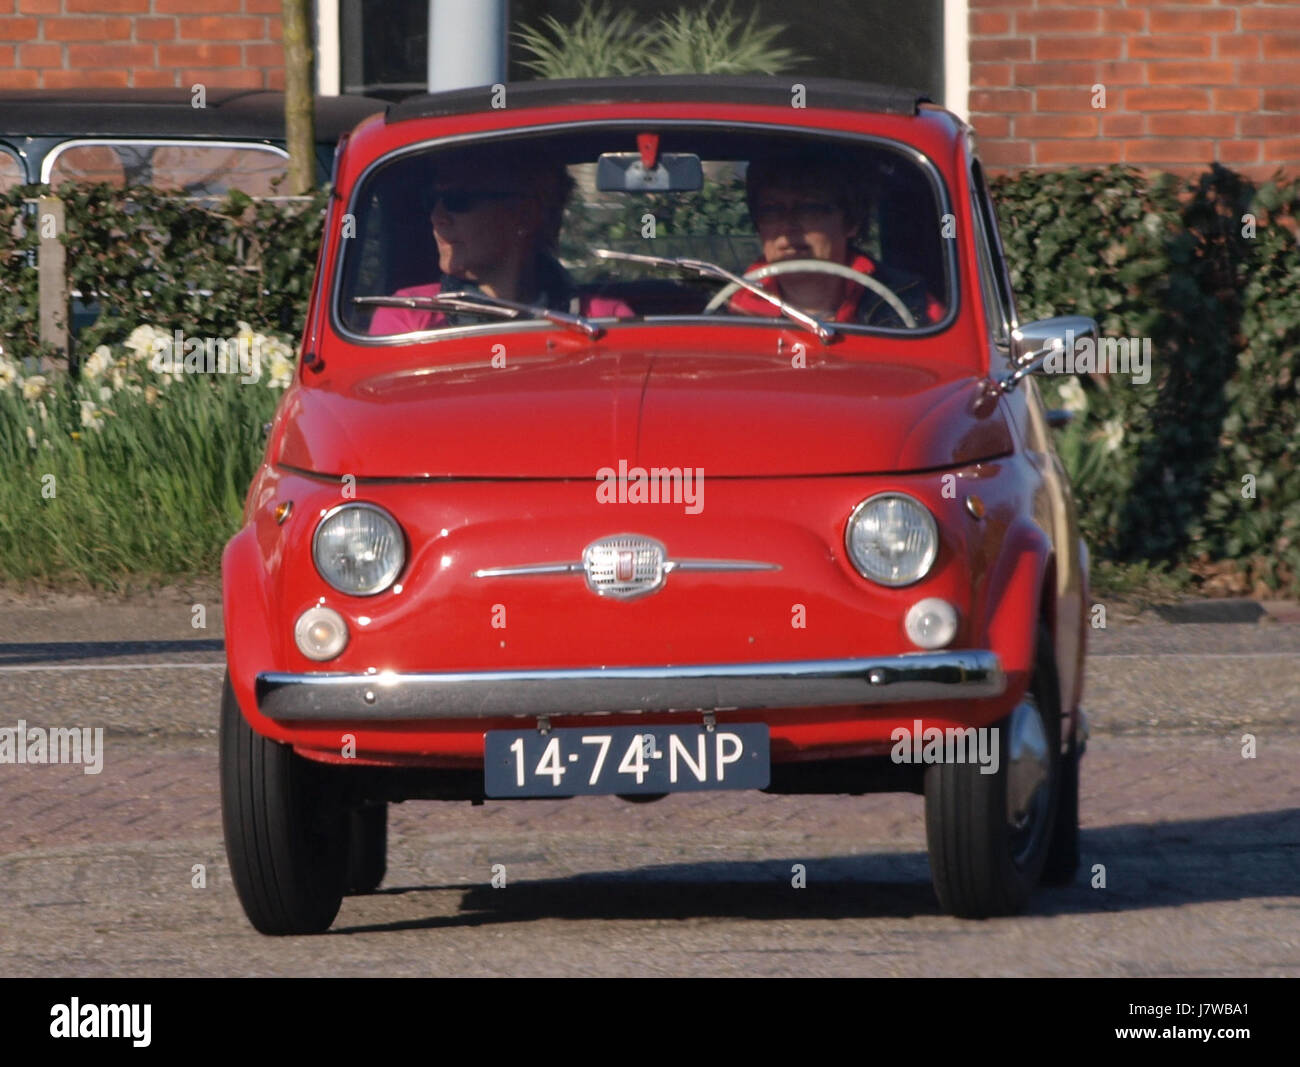 1970 Fiat , Dutch licence registration 14 74 NP, pic3 Stock Photo